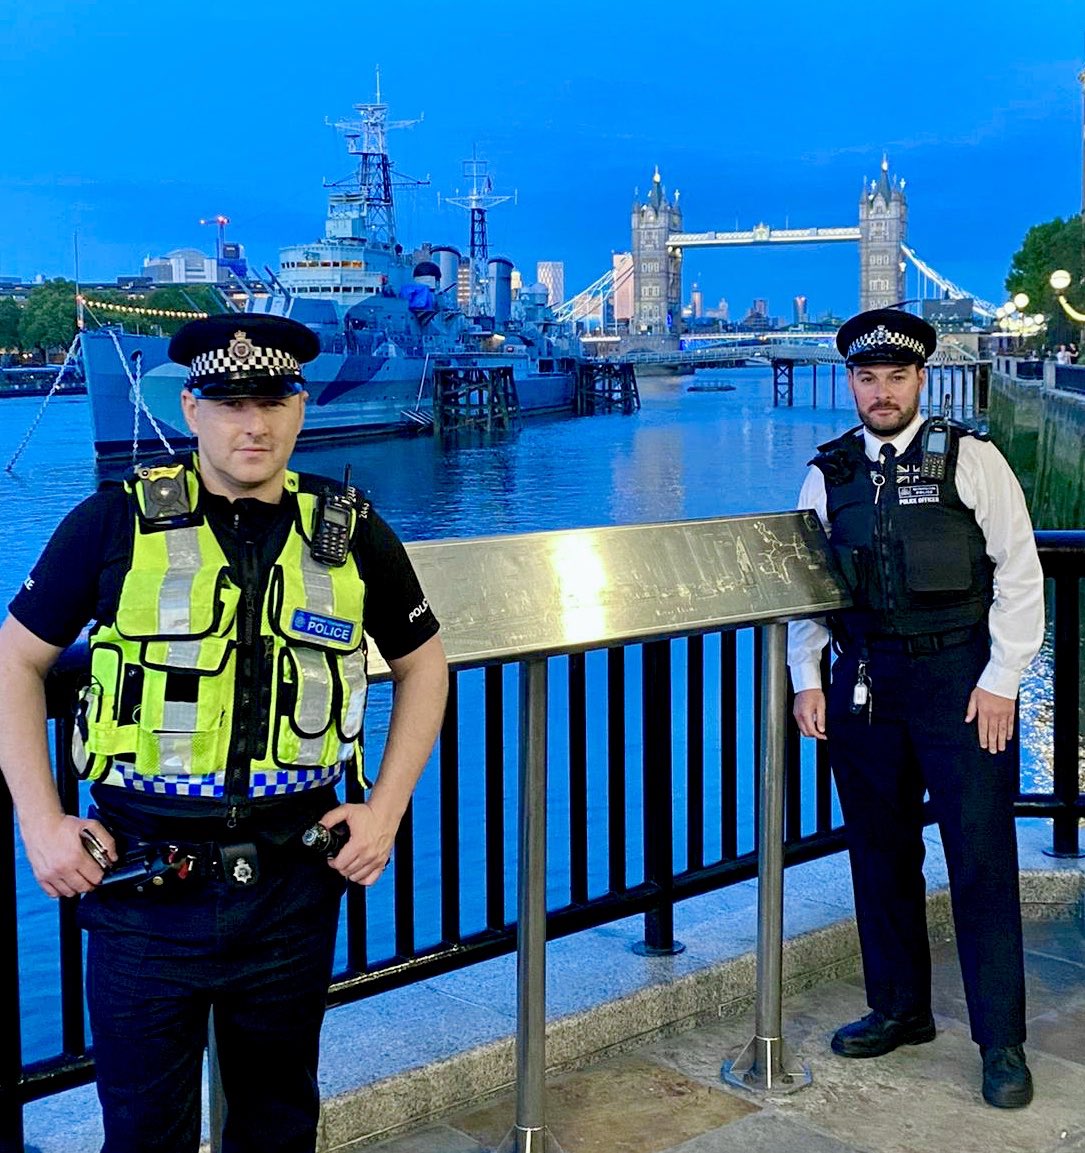 #BID officers on patrol around #LondonBridge station & Queens Walk lastnight. We checked our businesses were secure & gave advice to visitors. Our #KeyWorkers are reassured with no further reports of aggressive begging or intimidation as we continue to support our #NHS staff💙